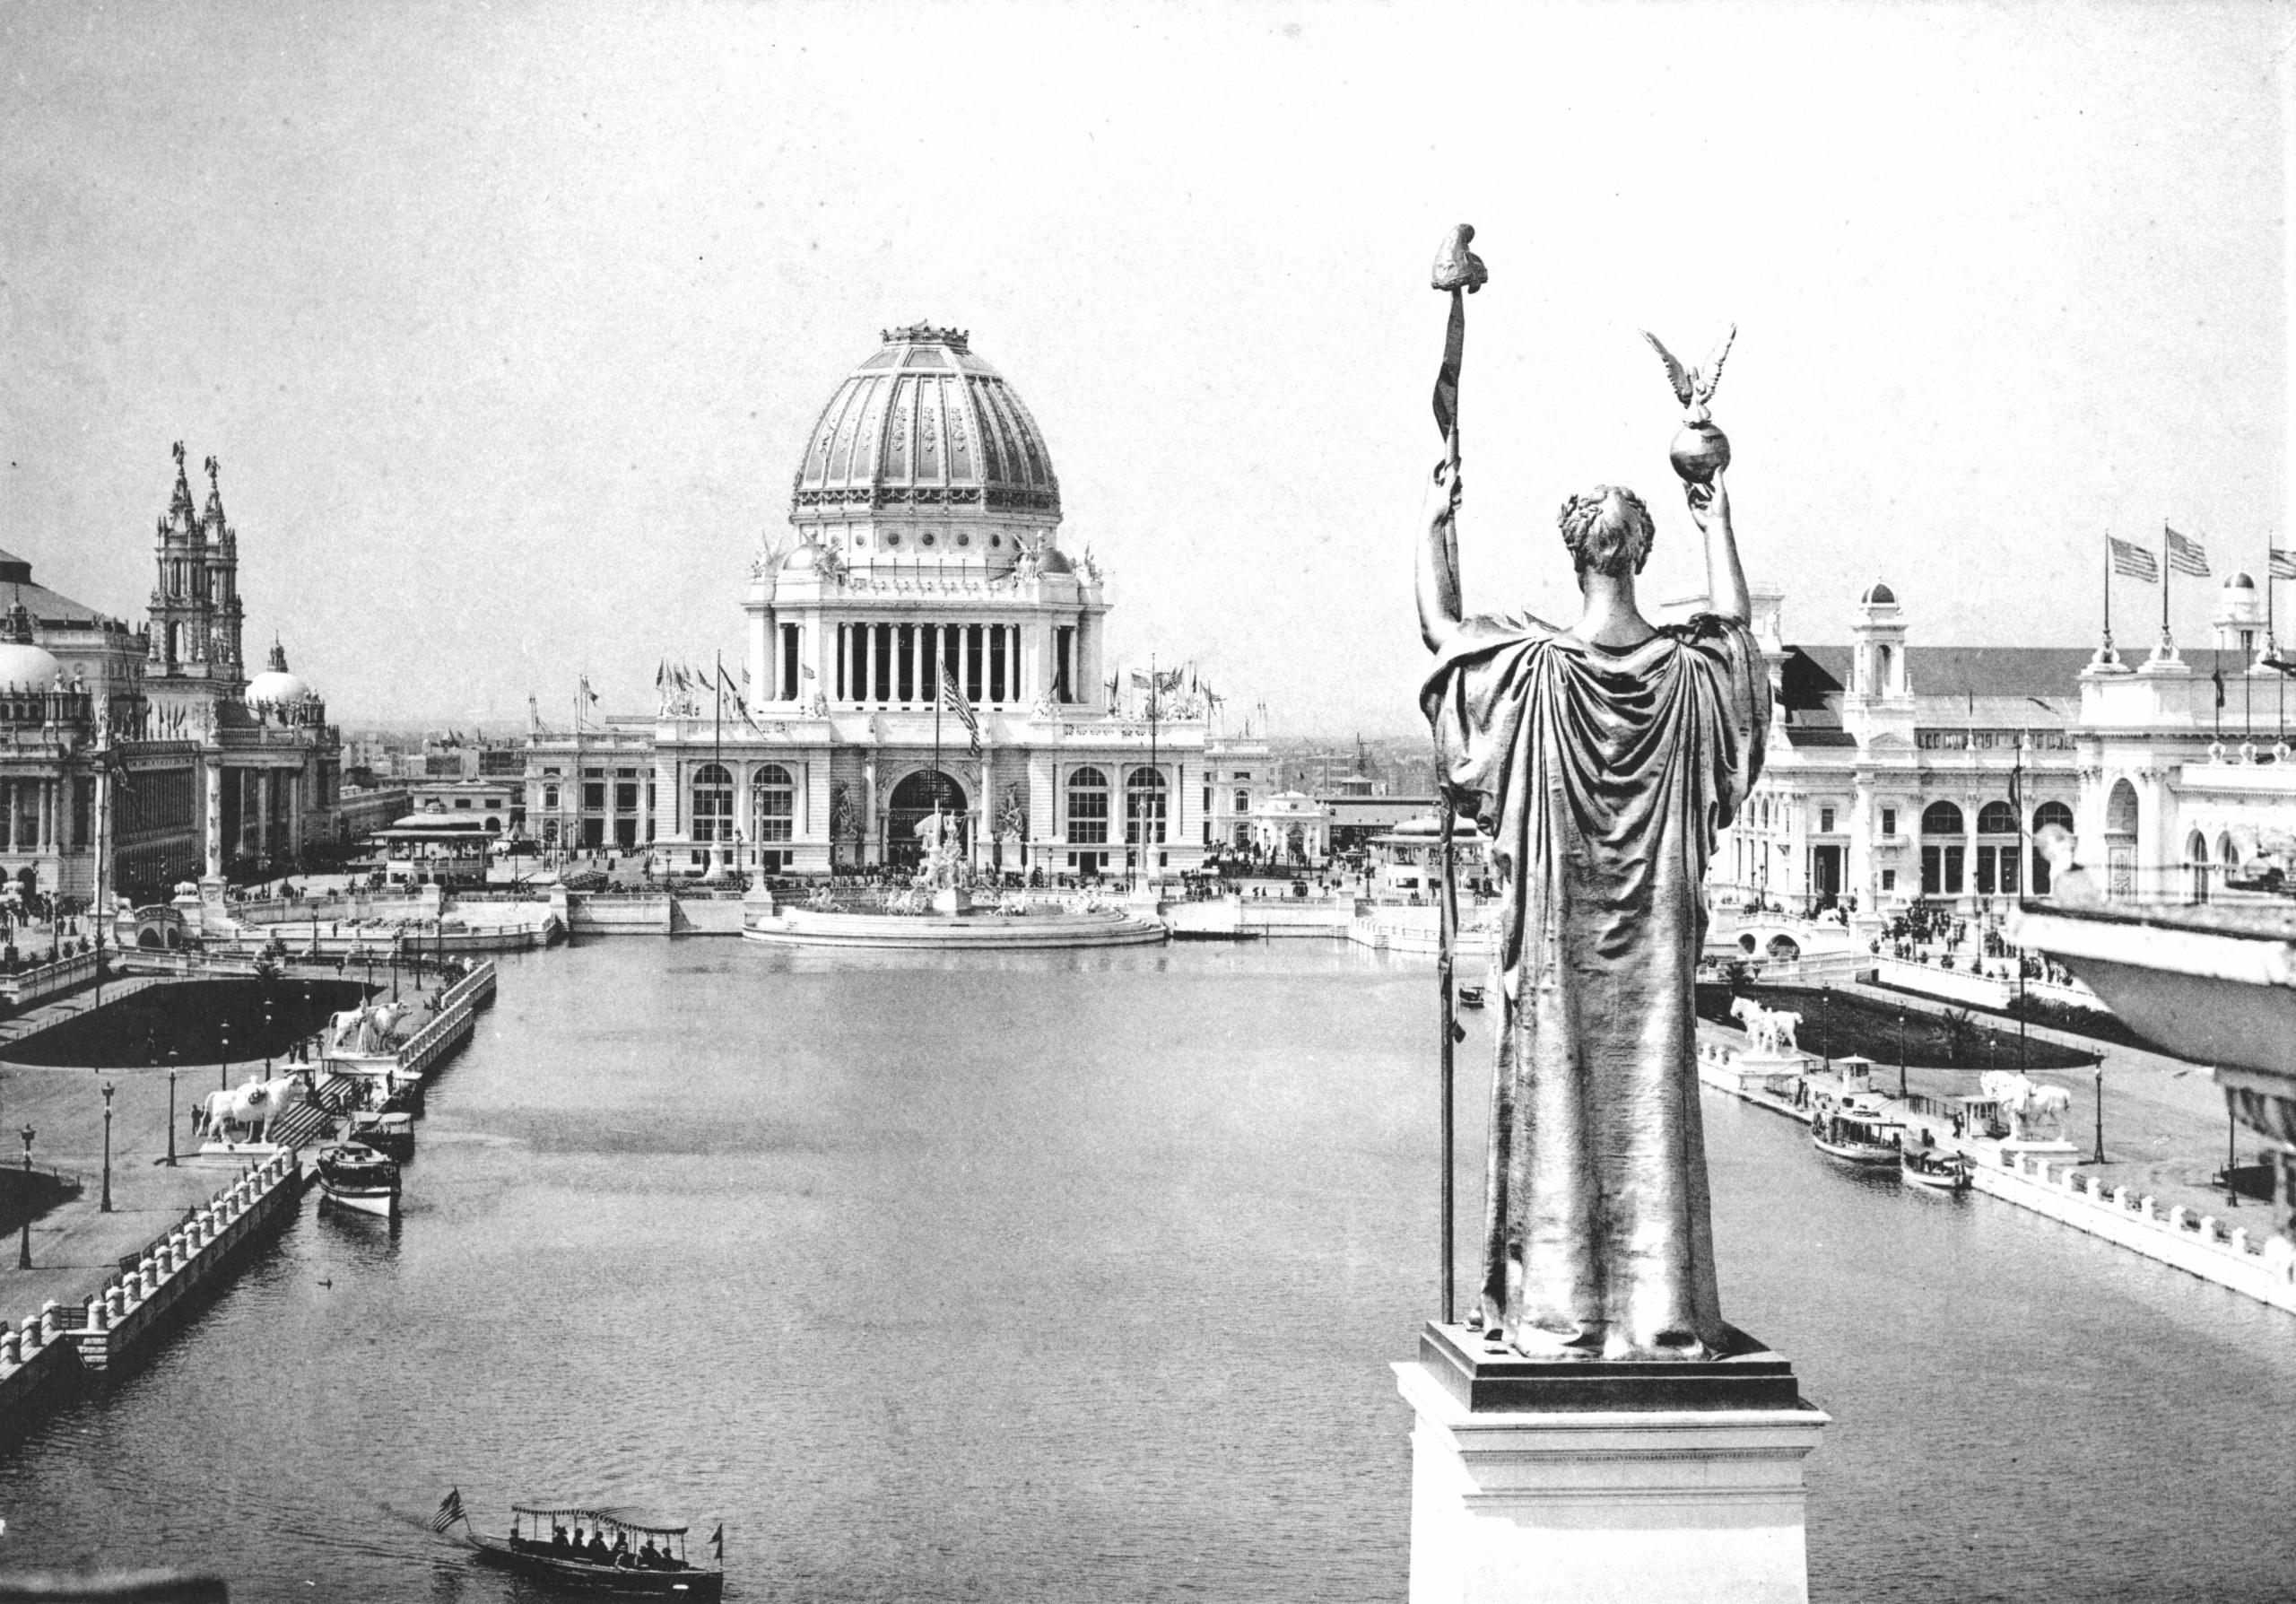 Photo of the World's Columbian Exposition